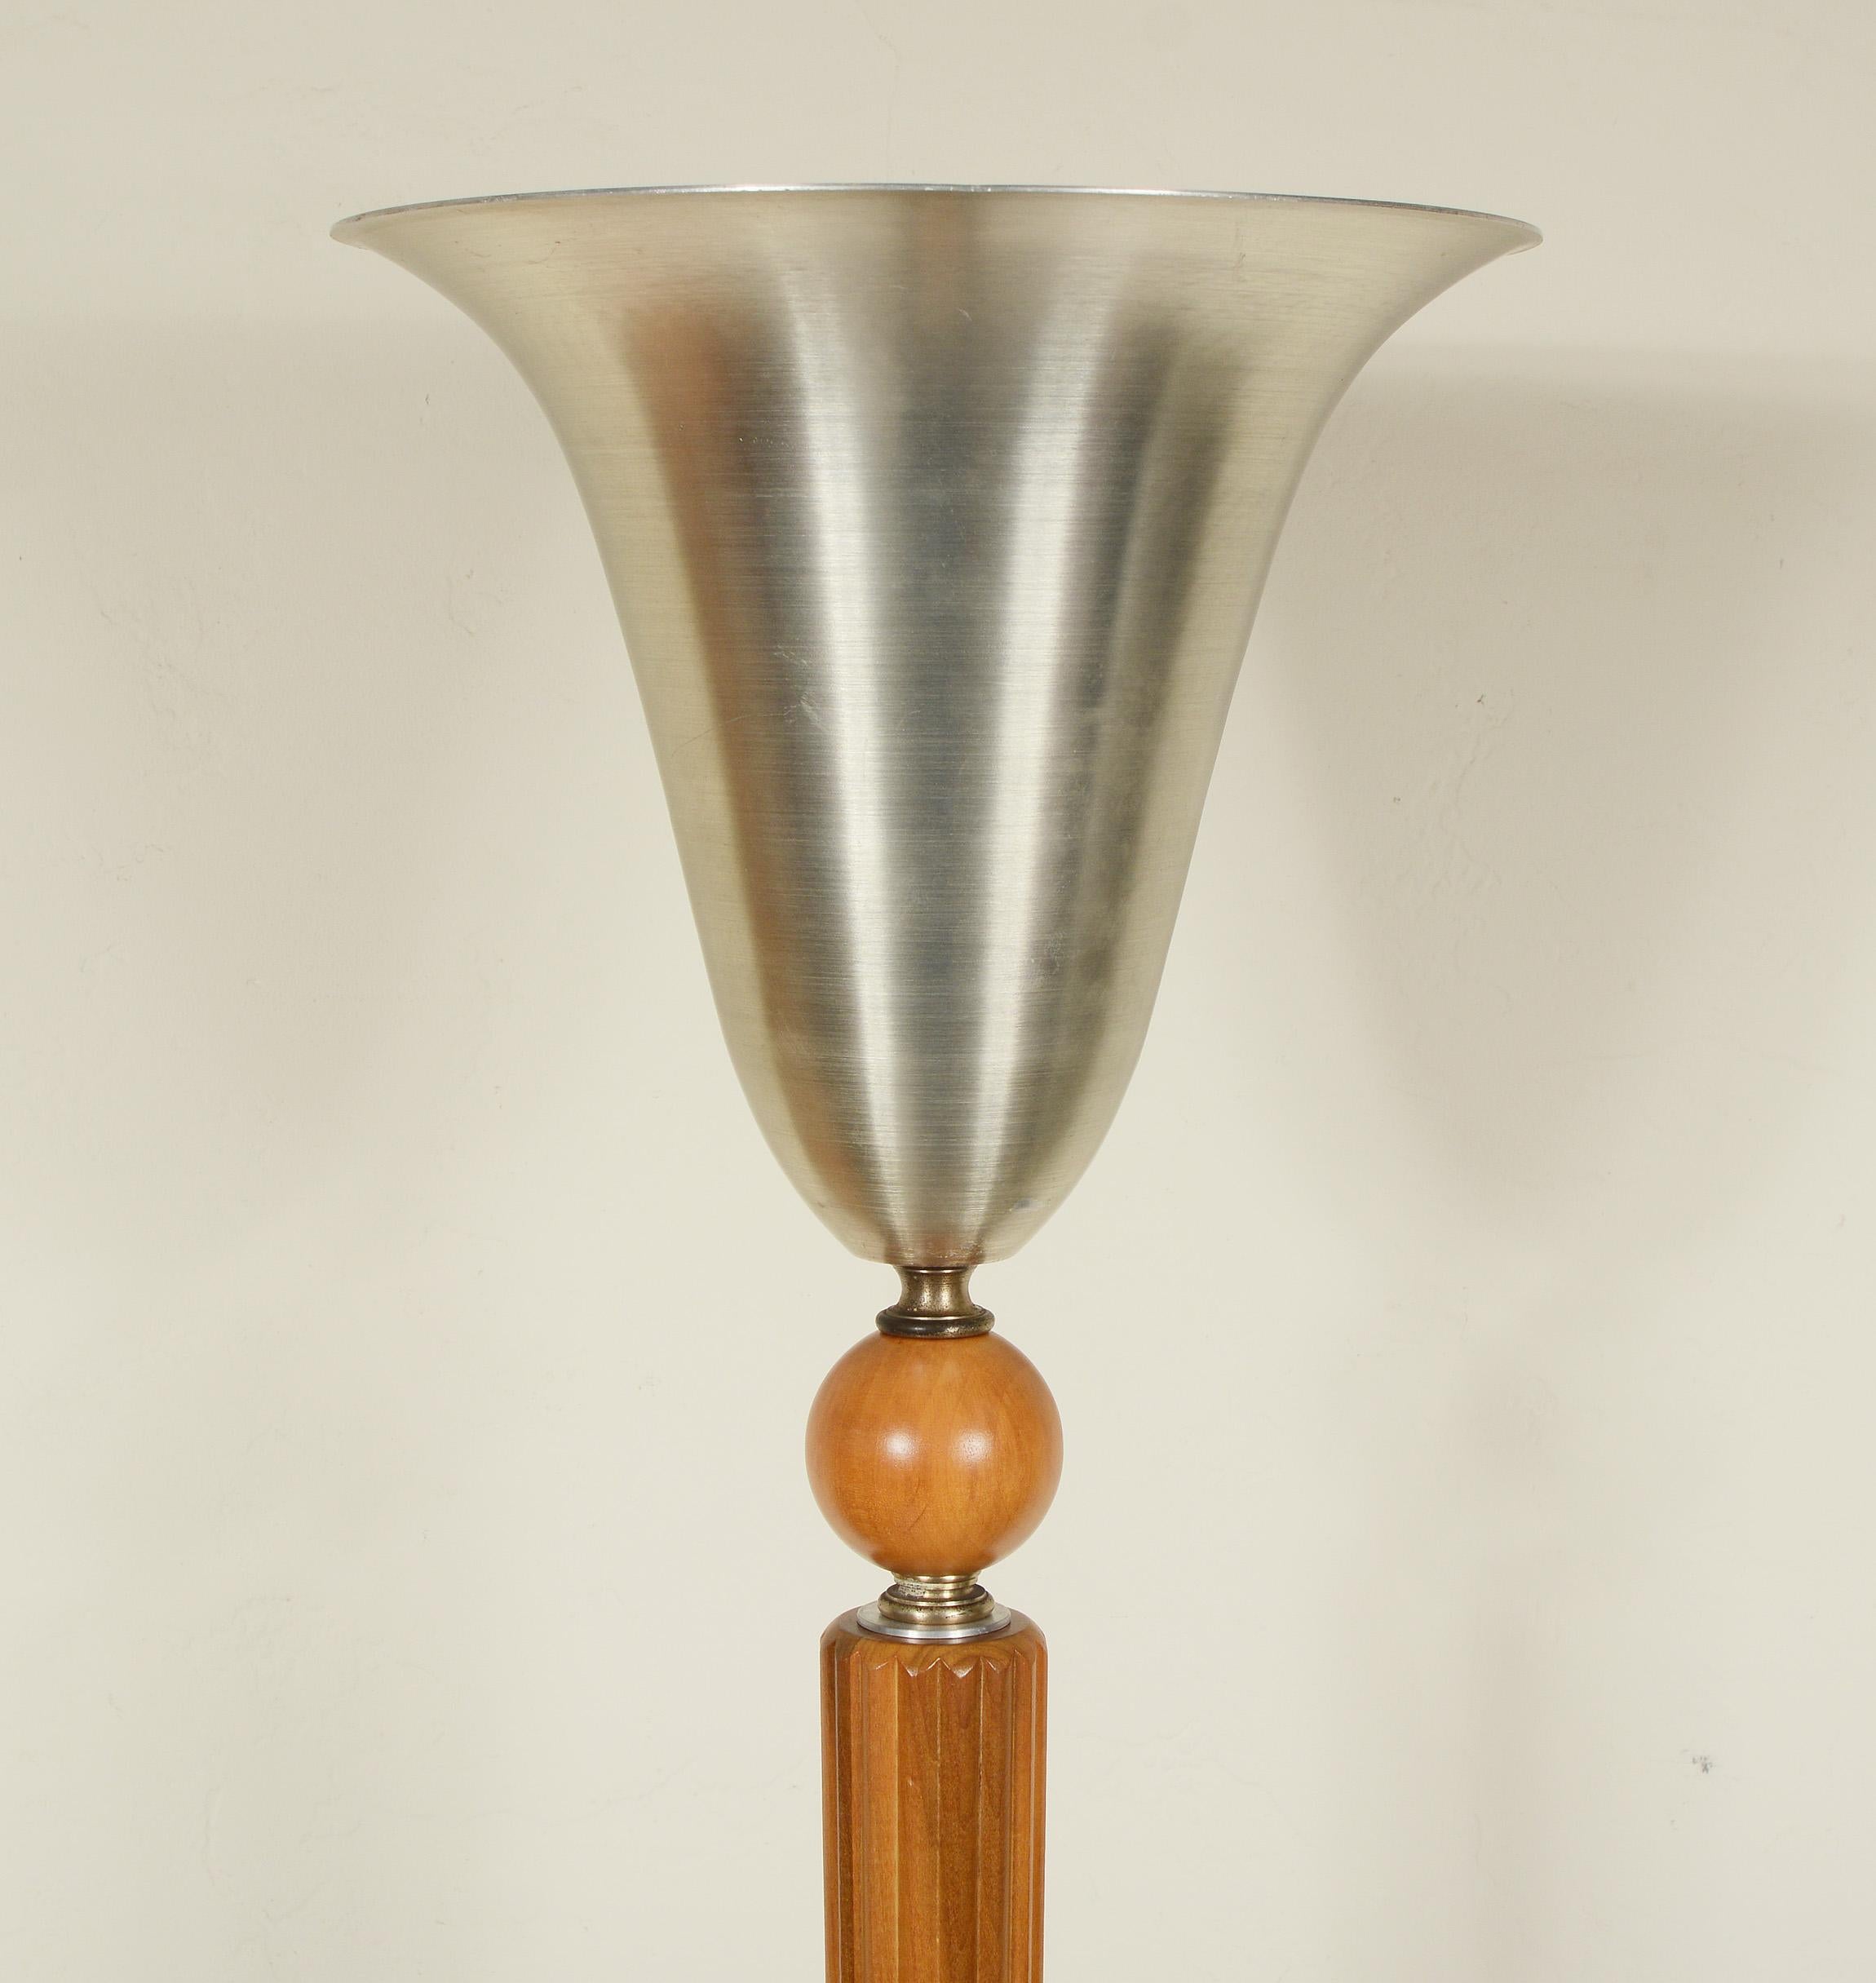 Moderne Art Deco torchiere by Marbro Lamp Co. This lamp has a ribbed wood column with an aluminum shade and base. The lamp has a three way mogul socket. The wood is refinished and it has been rewired with brown twisted rayon cord. The aluminum shows